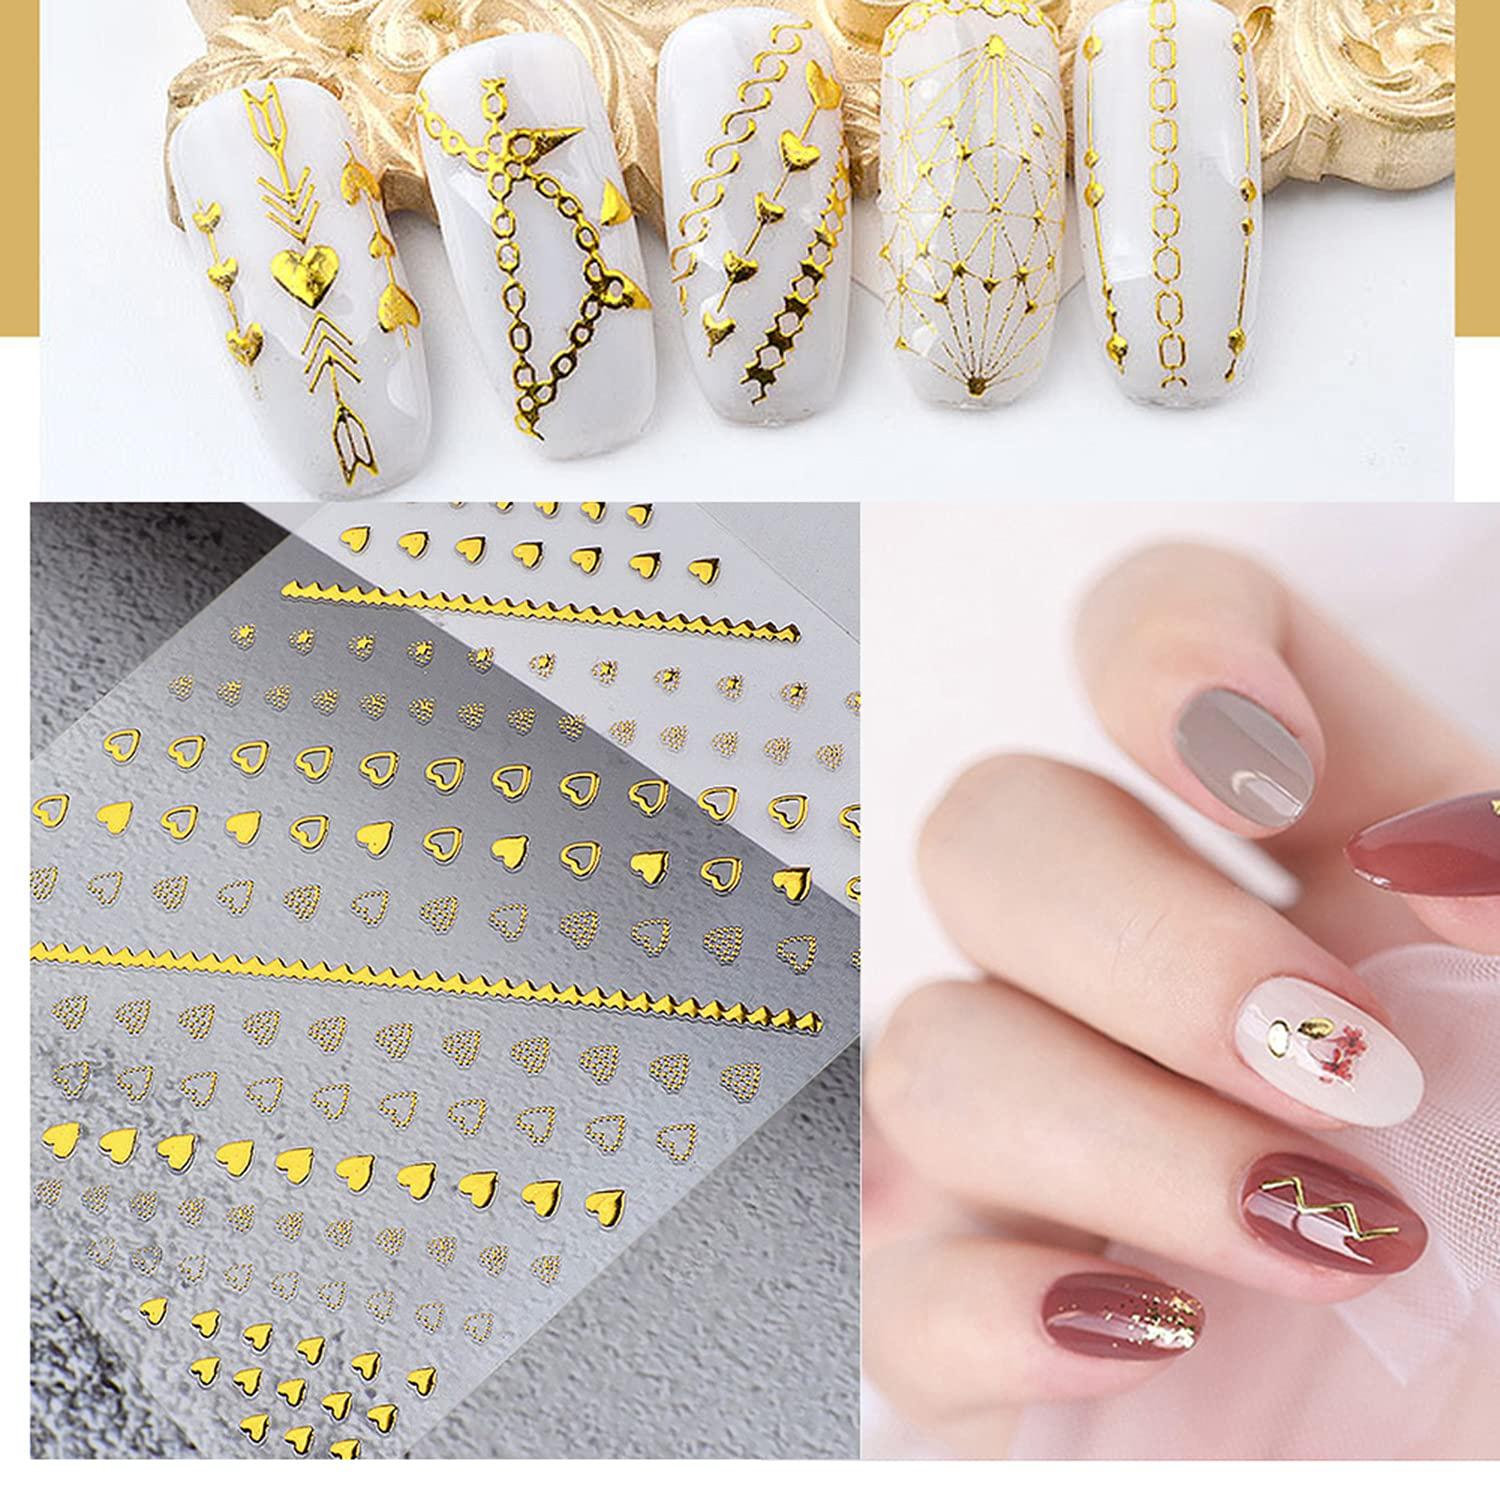 3D Nail Stickers Glitter Gold Silver Laser Wave Line Decals Nail